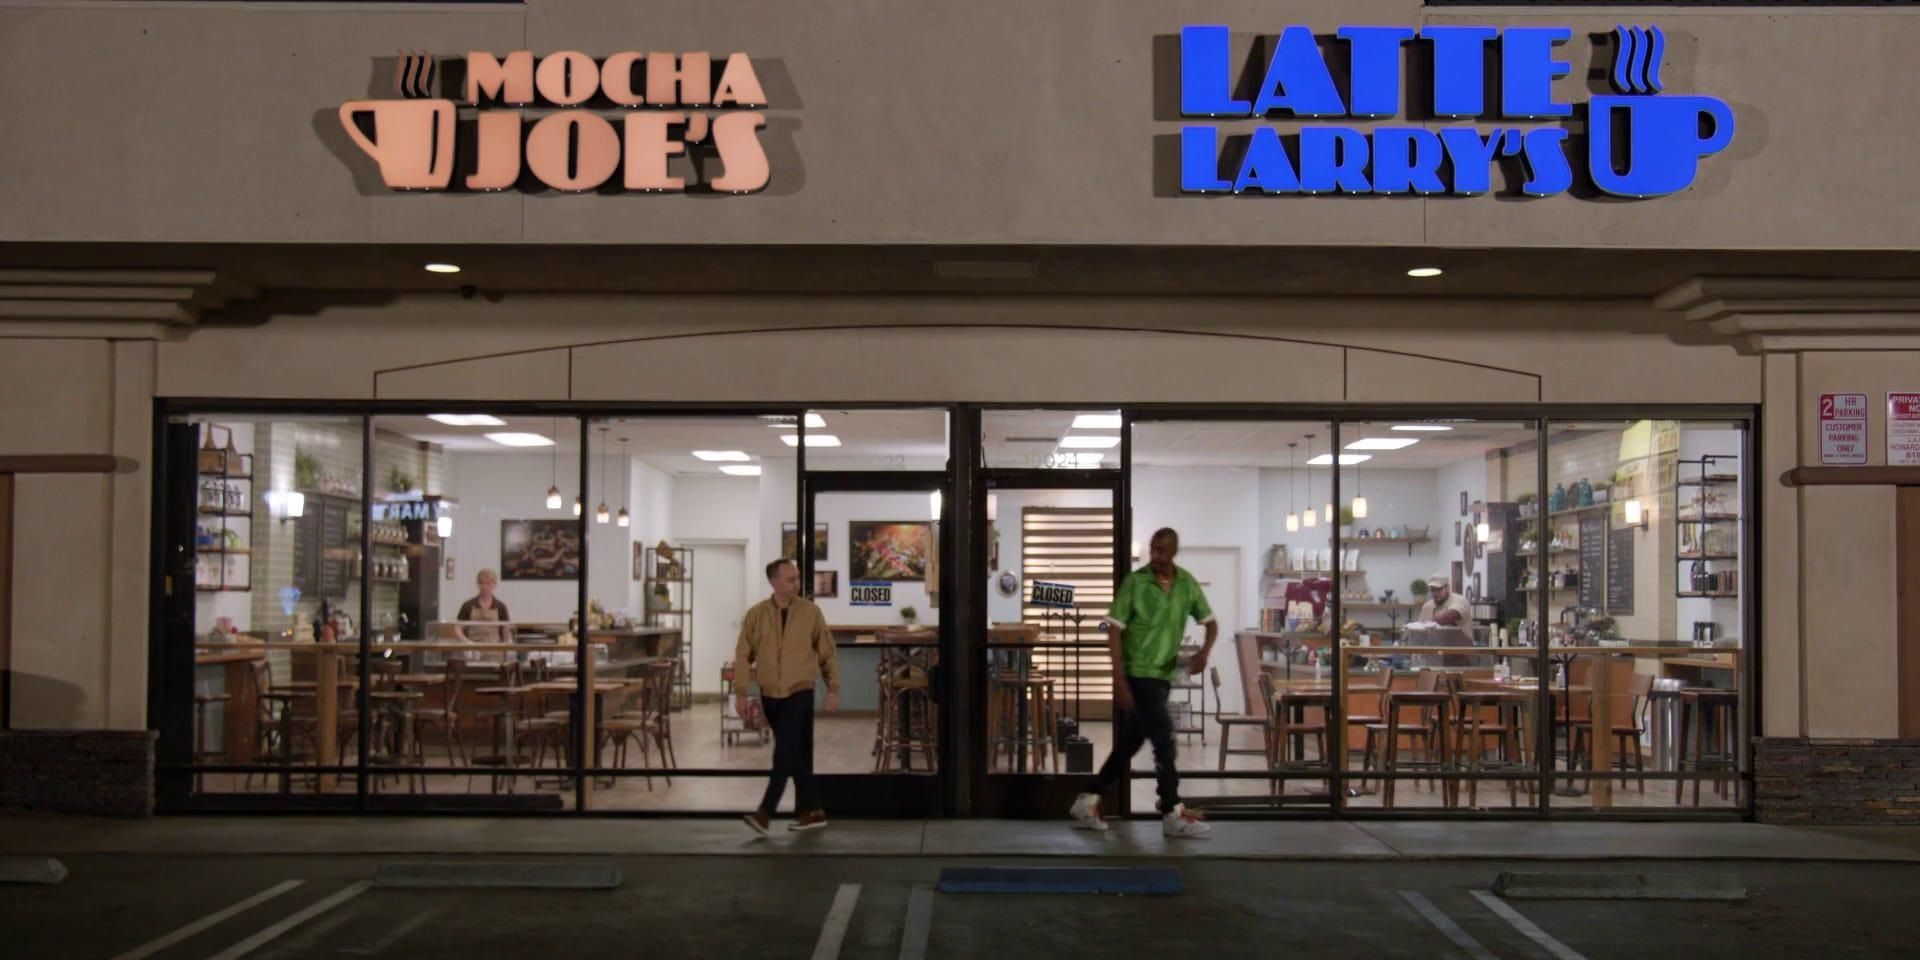 An image of the Spite store in Curb Your Enthusiasm